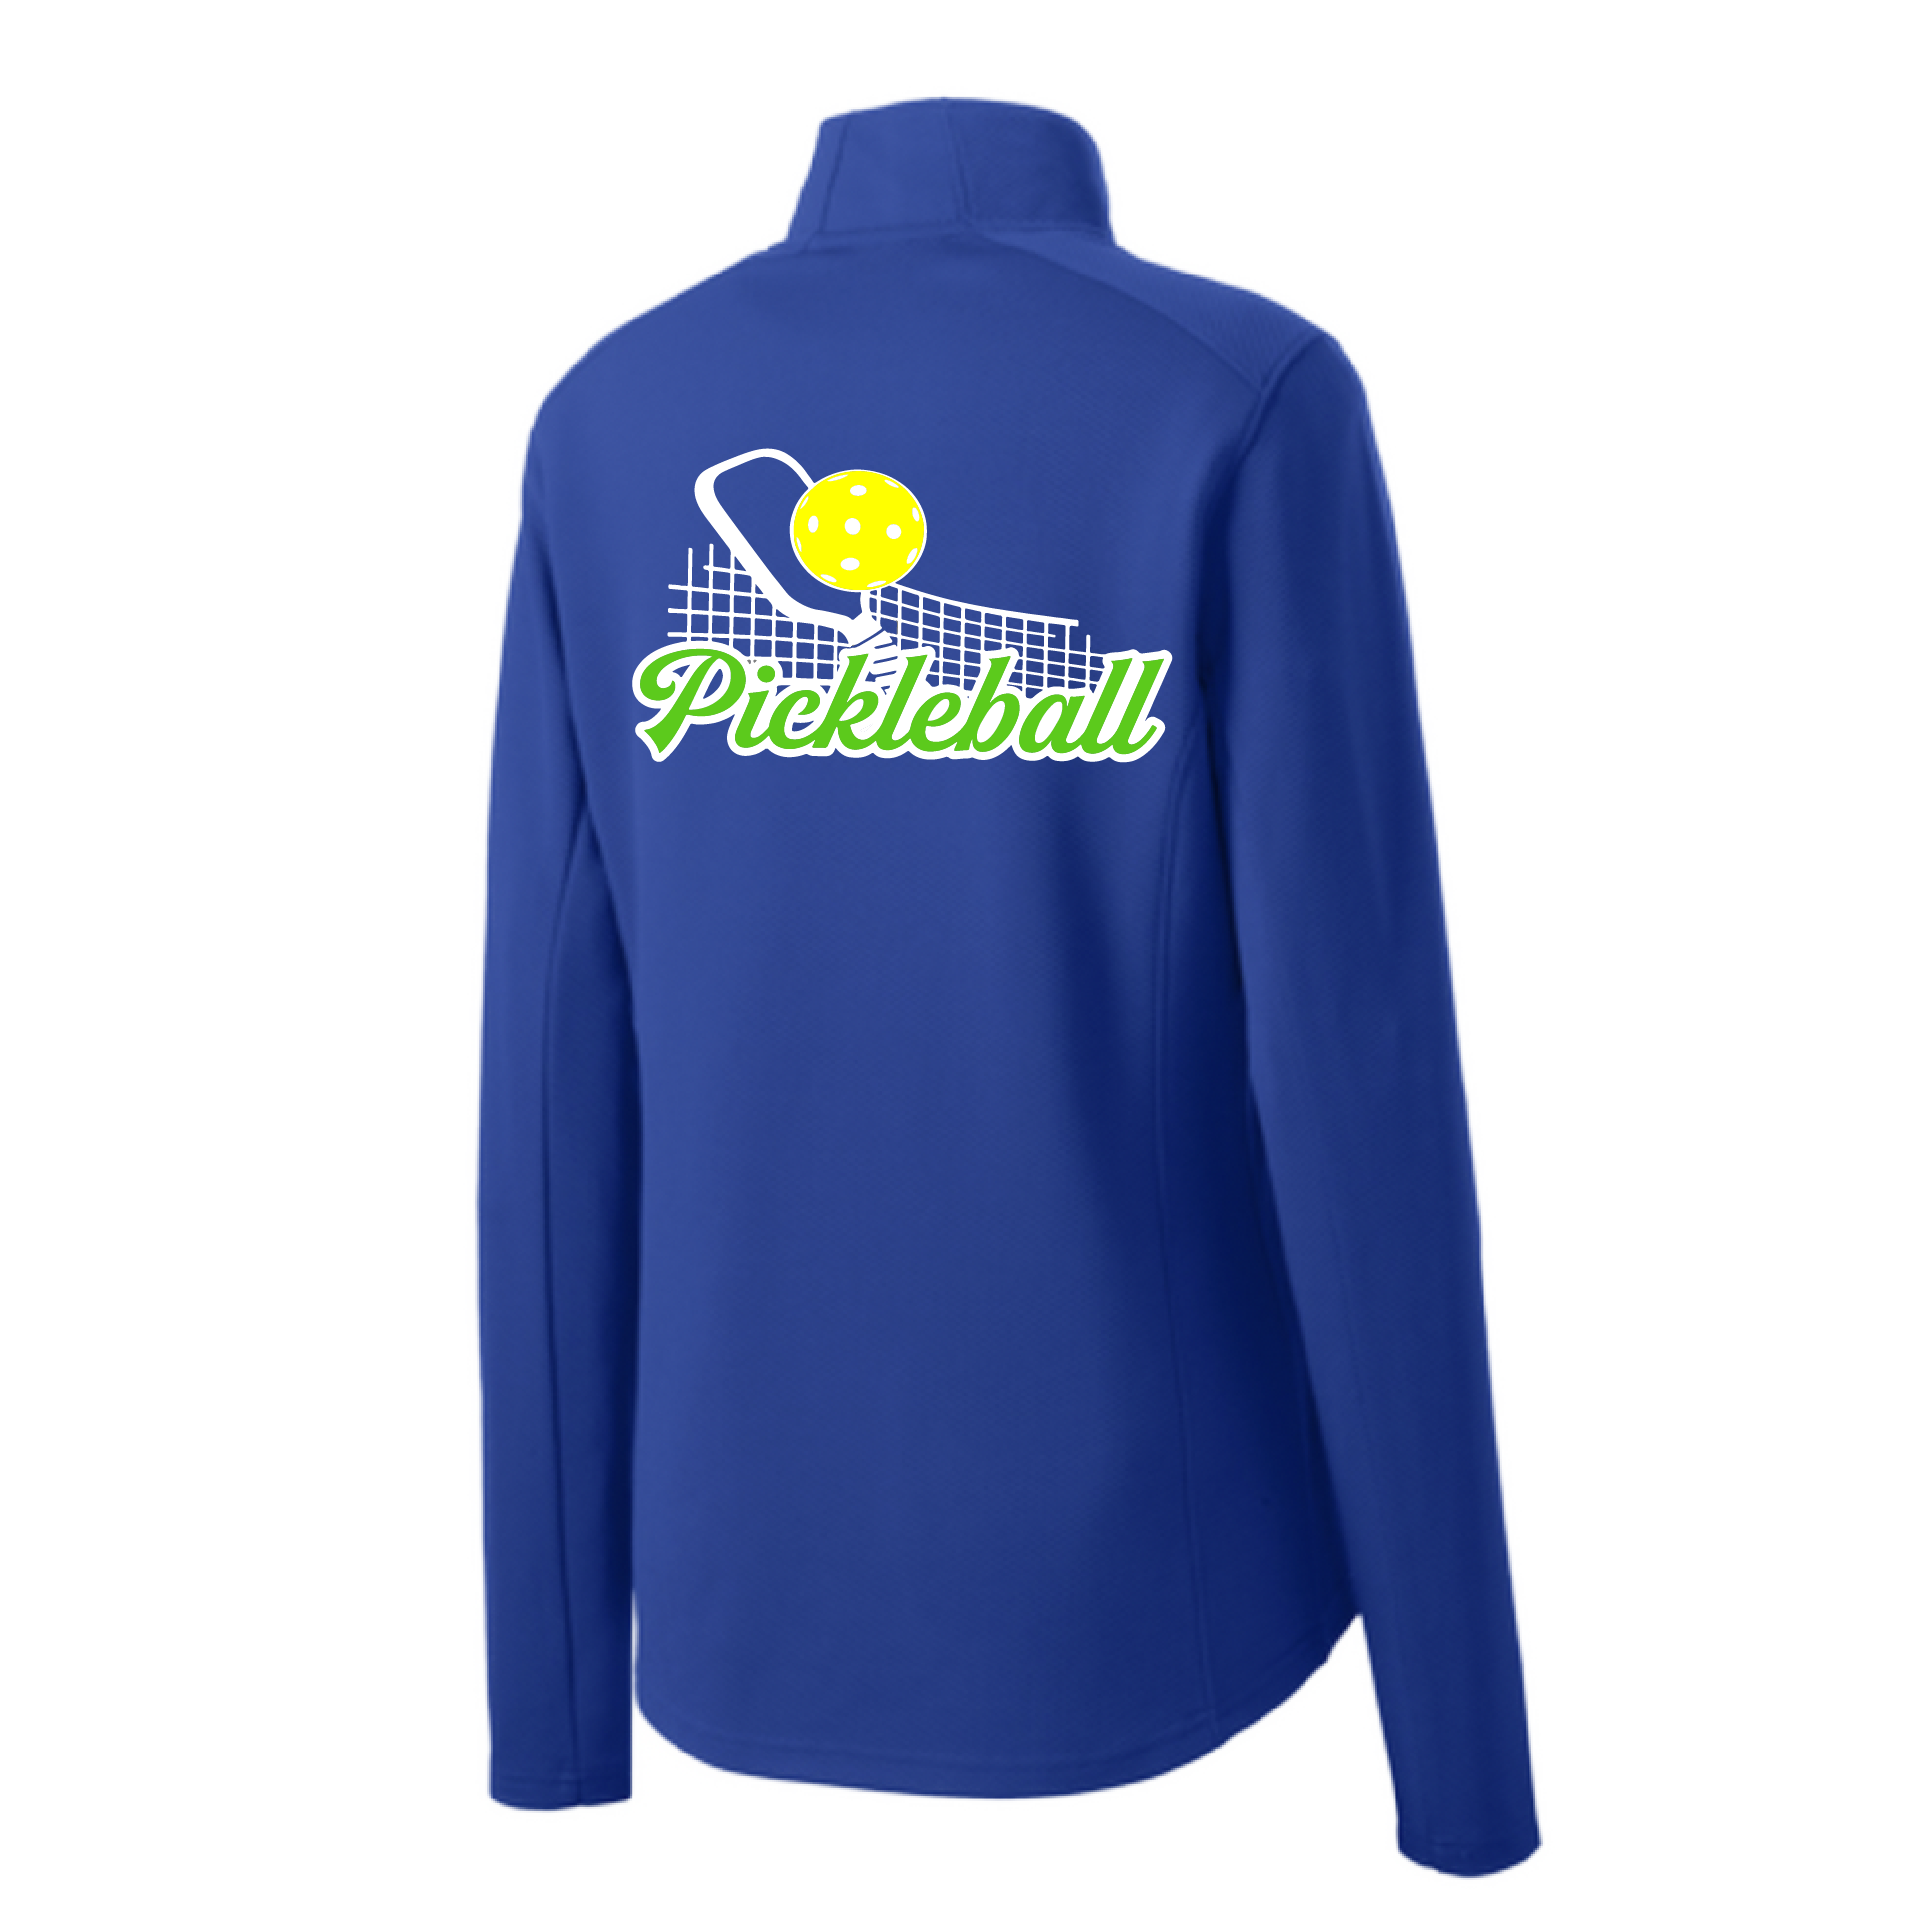 Pickleball Design: Pickleball and Net  Women's 1/4-Zip Pullover: Princess seams and drop tail hem.  Turn up the volume in this Women's shirt with its perfect mix of softness and attitude. Material is ultra-comfortable with moisture wicking properties and tri-blend softness. PosiCharge technology locks in color. Highly breathable and lightweight. Versatile enough for wearing year-round.